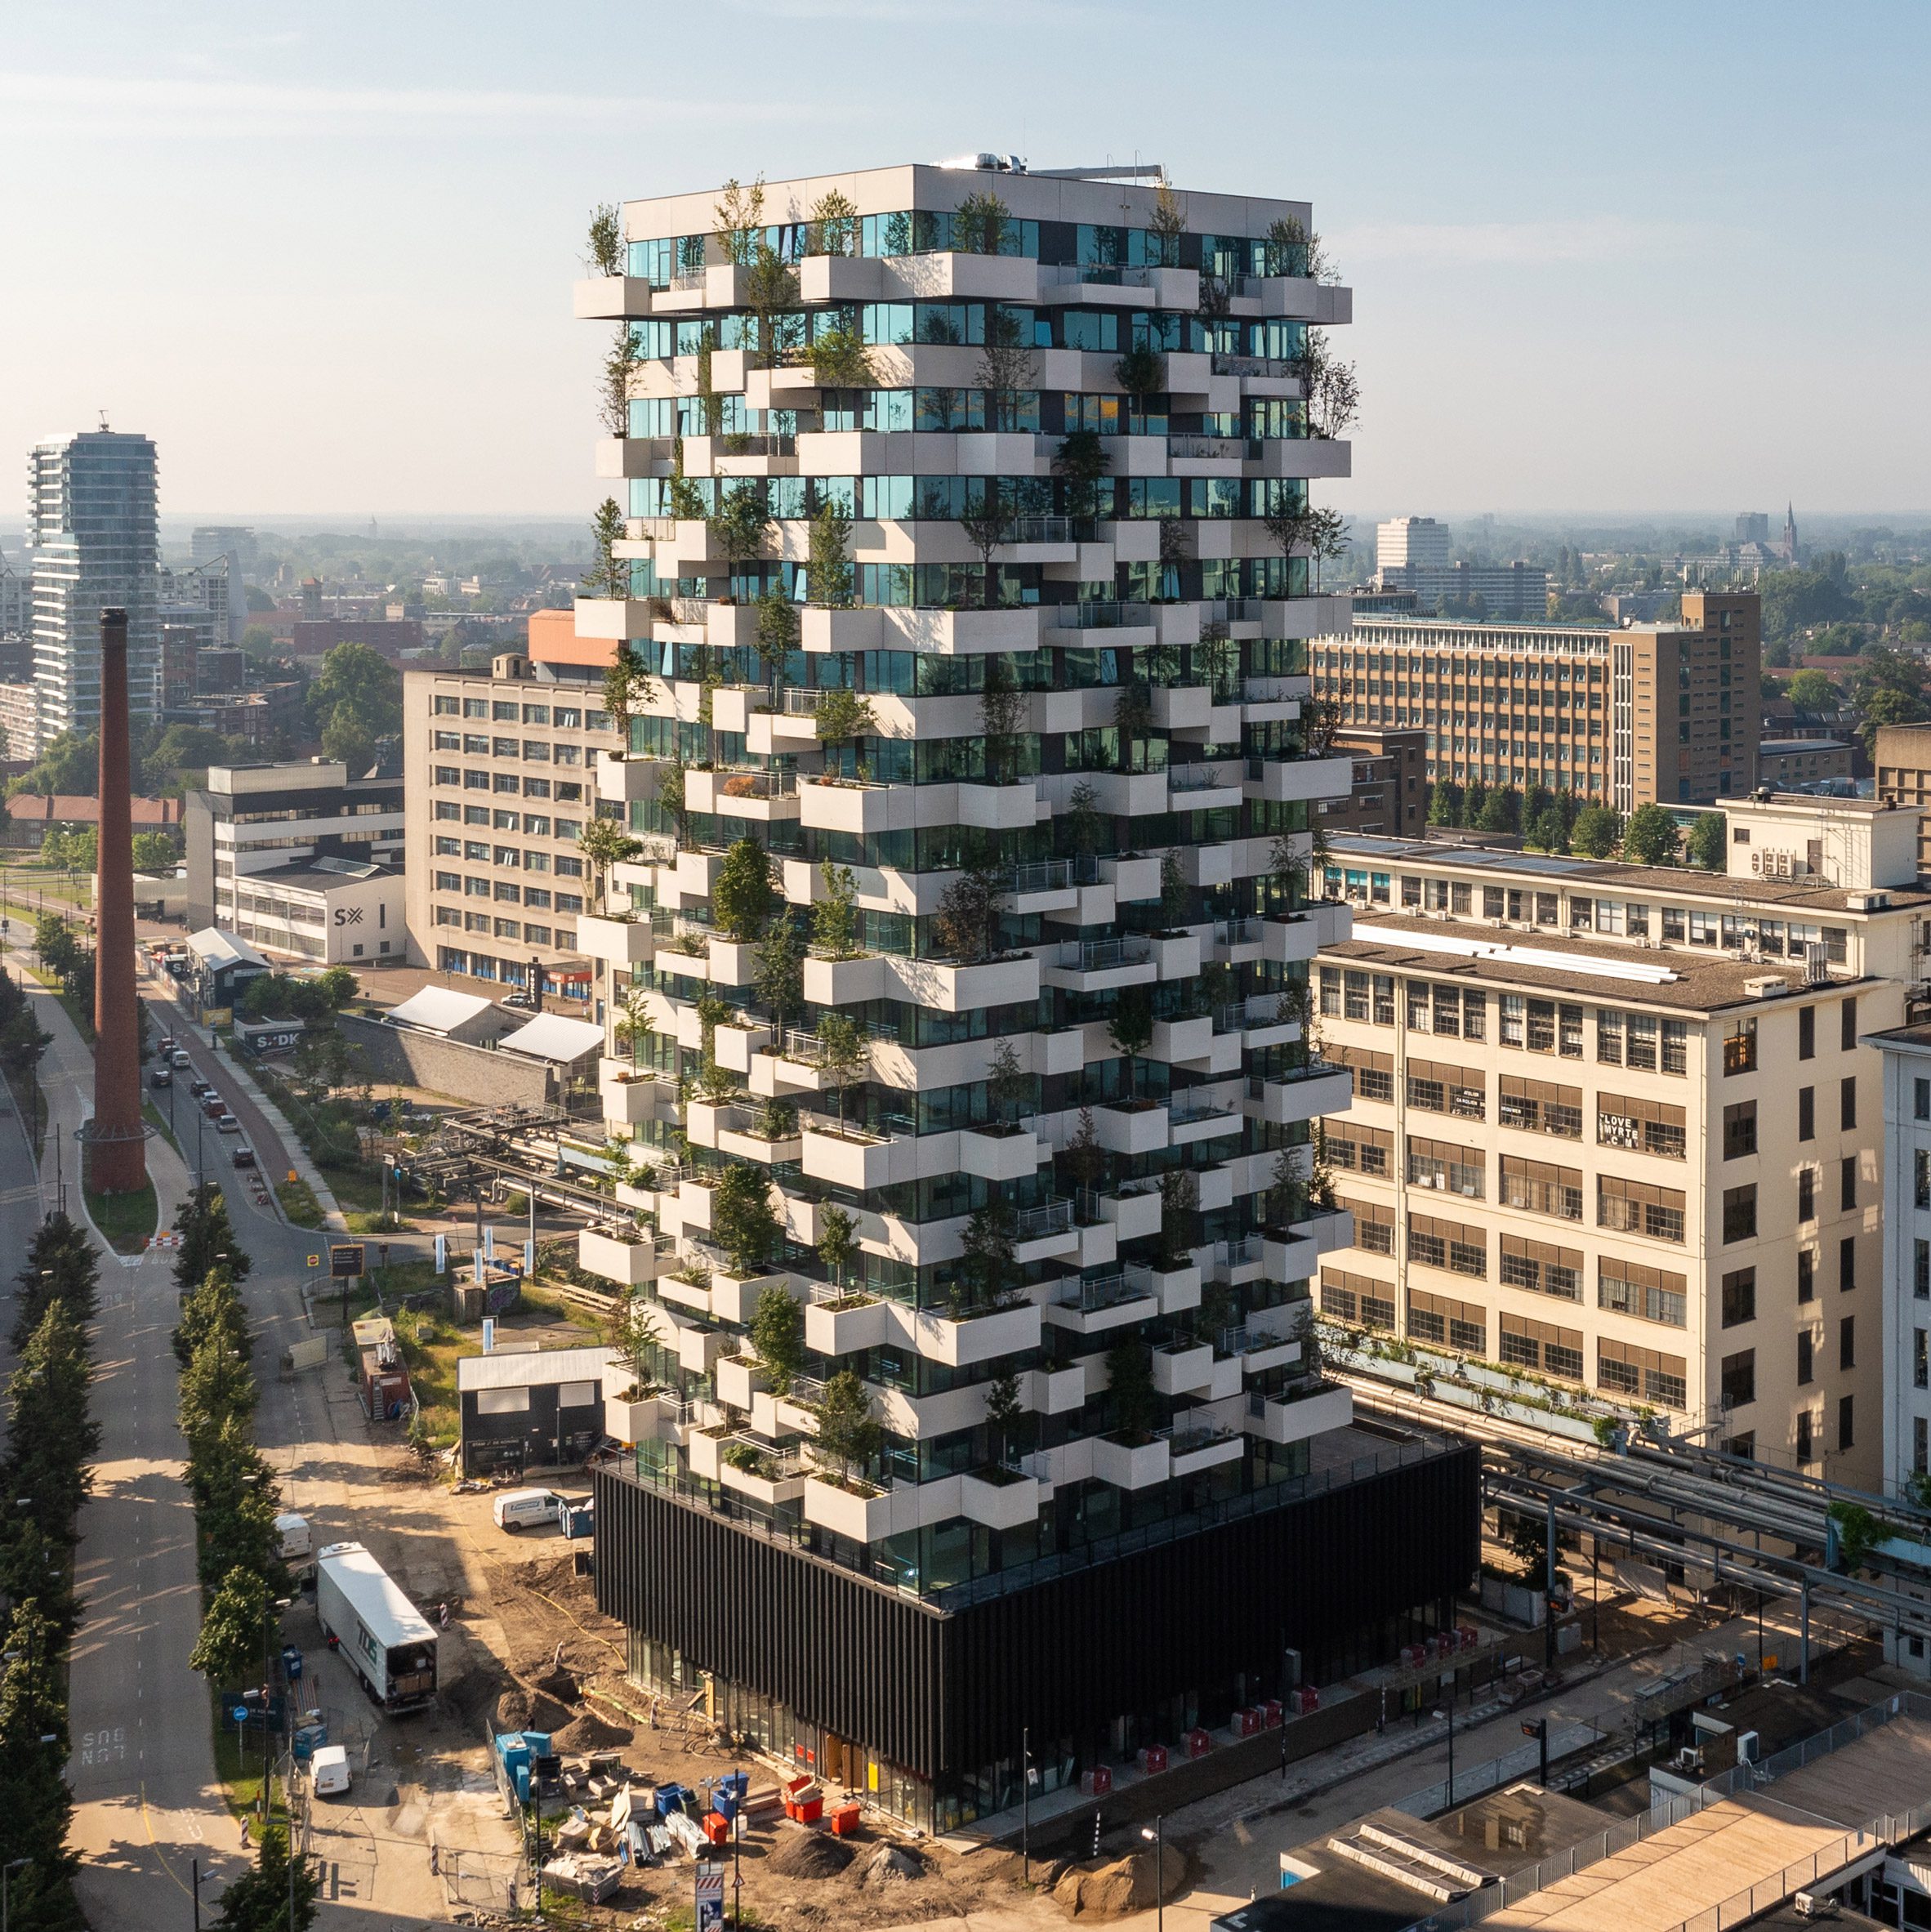 Trudo vertical forest is wrapped in plants and trees